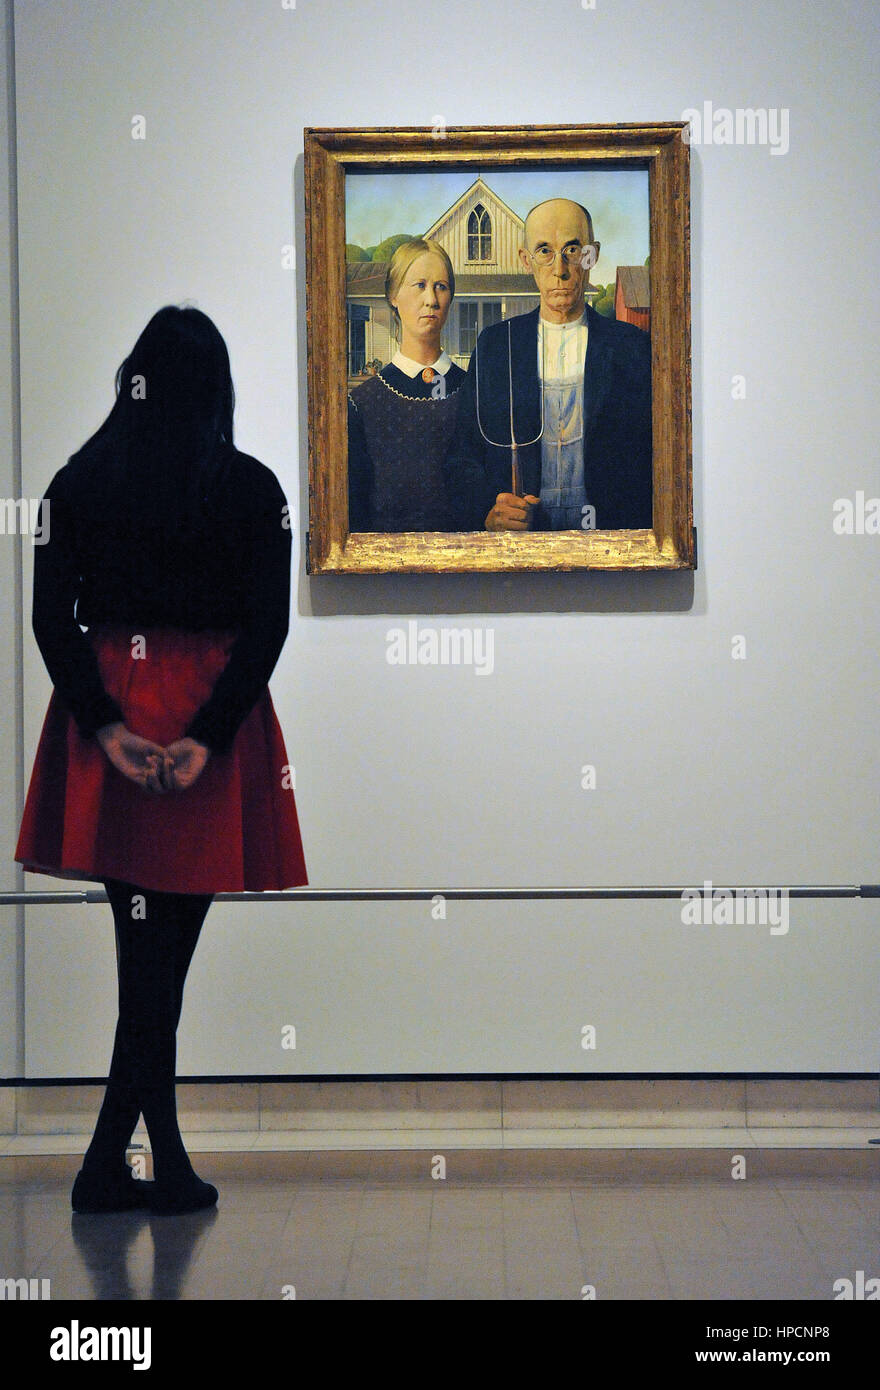 A woman looks at American Gothic by Grant Wood on display during a photocall in the Sackler Galleries at Royal Academy of Arts, London, ahead of the opening of the their America after the Fall: Painting in the 1930s exhibition. Stock Photo